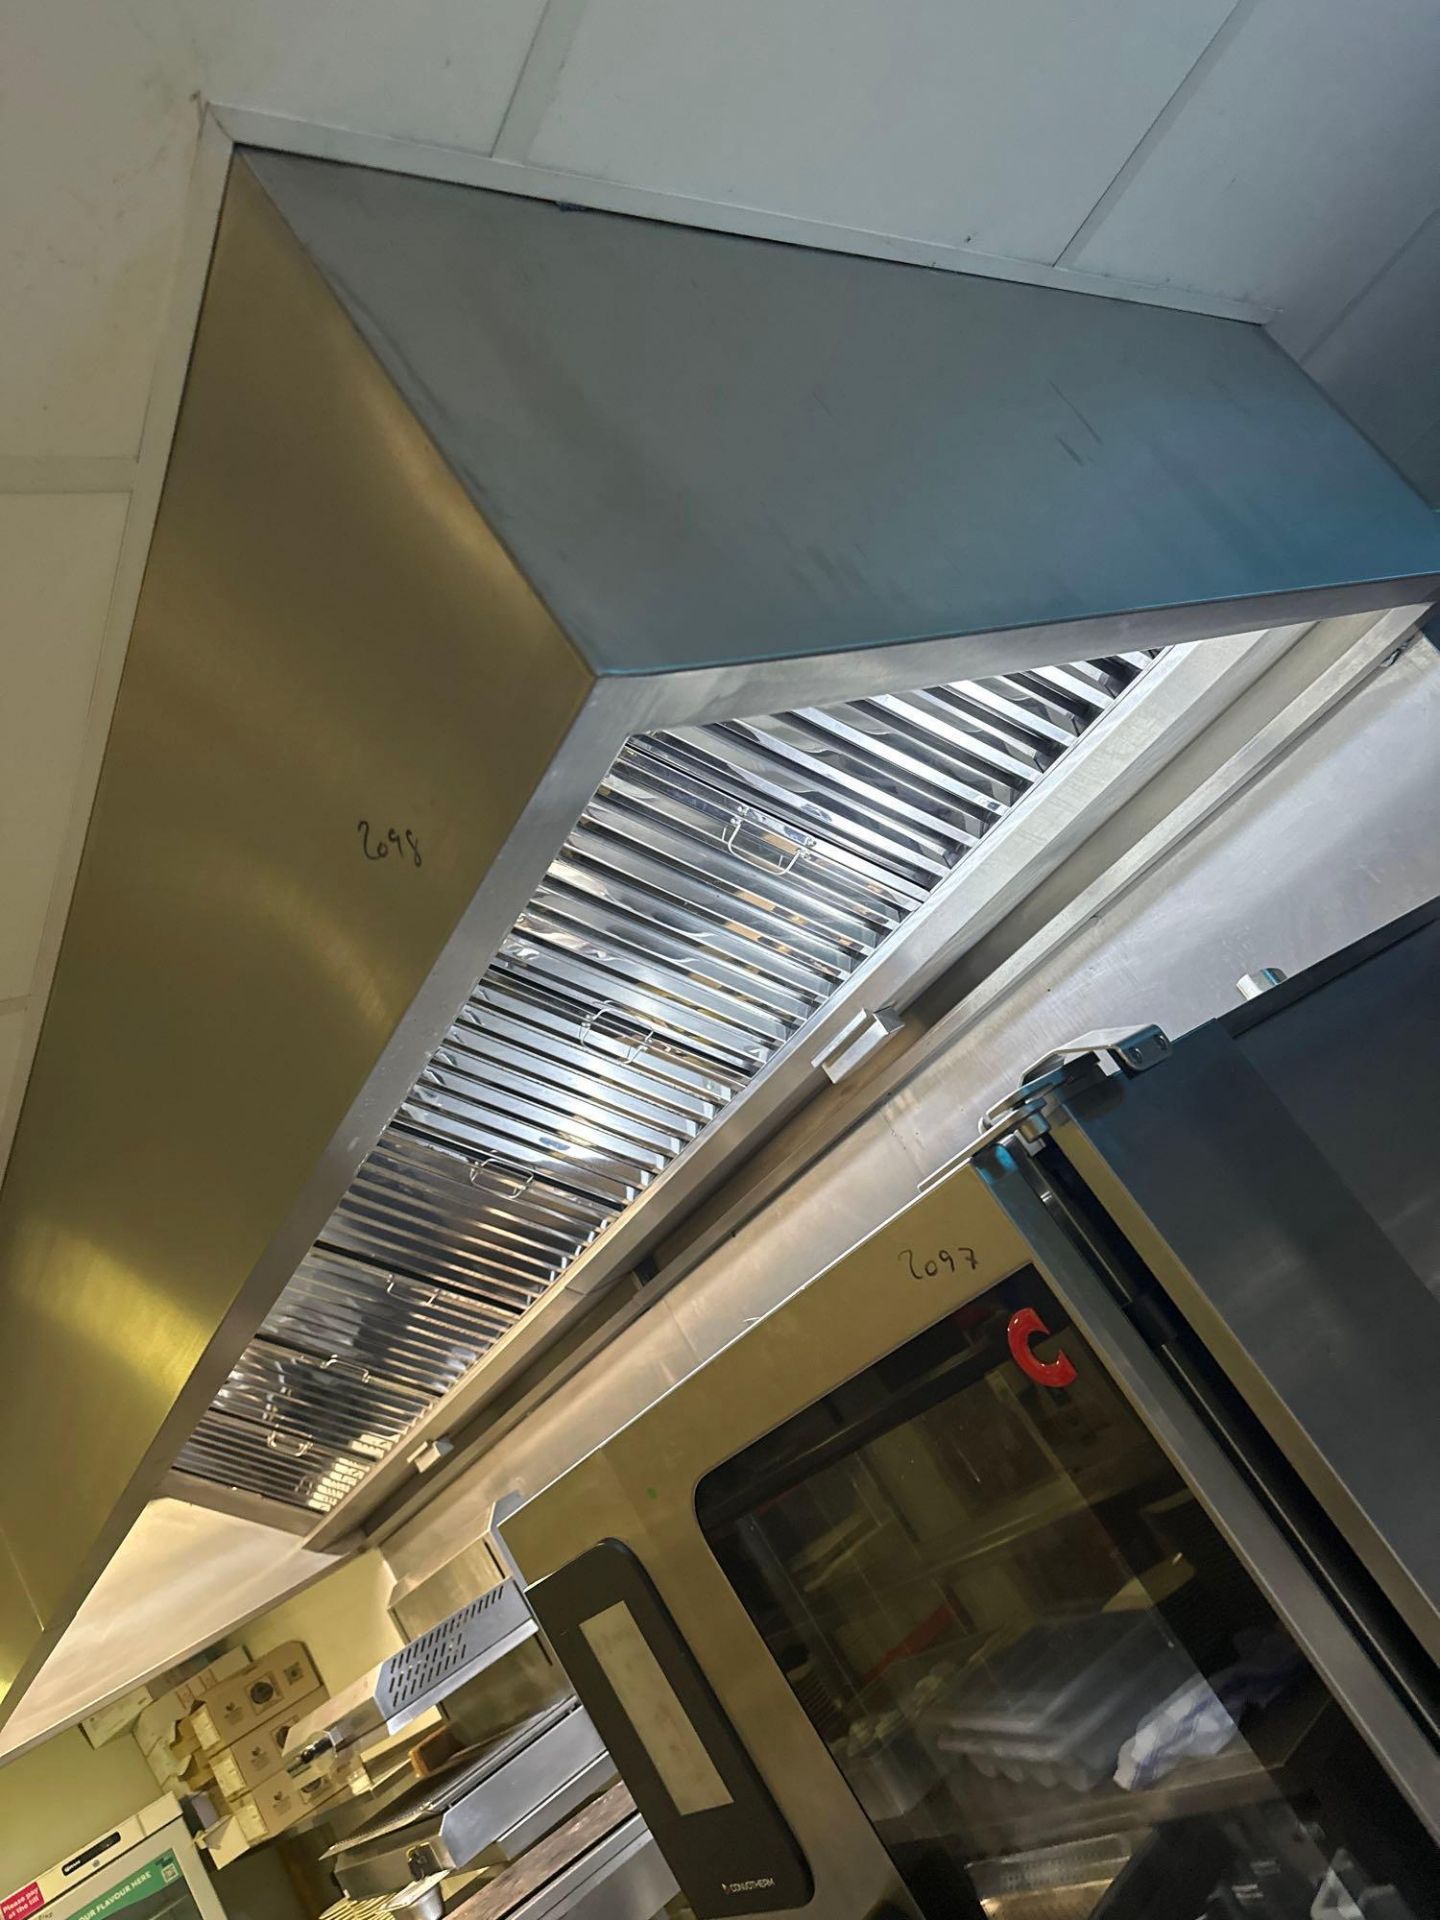 Stainless Steel baffle Extraction Canopy Unit 390 X 120cm ( Location: Upstairs Kitchen) - Image 2 of 5